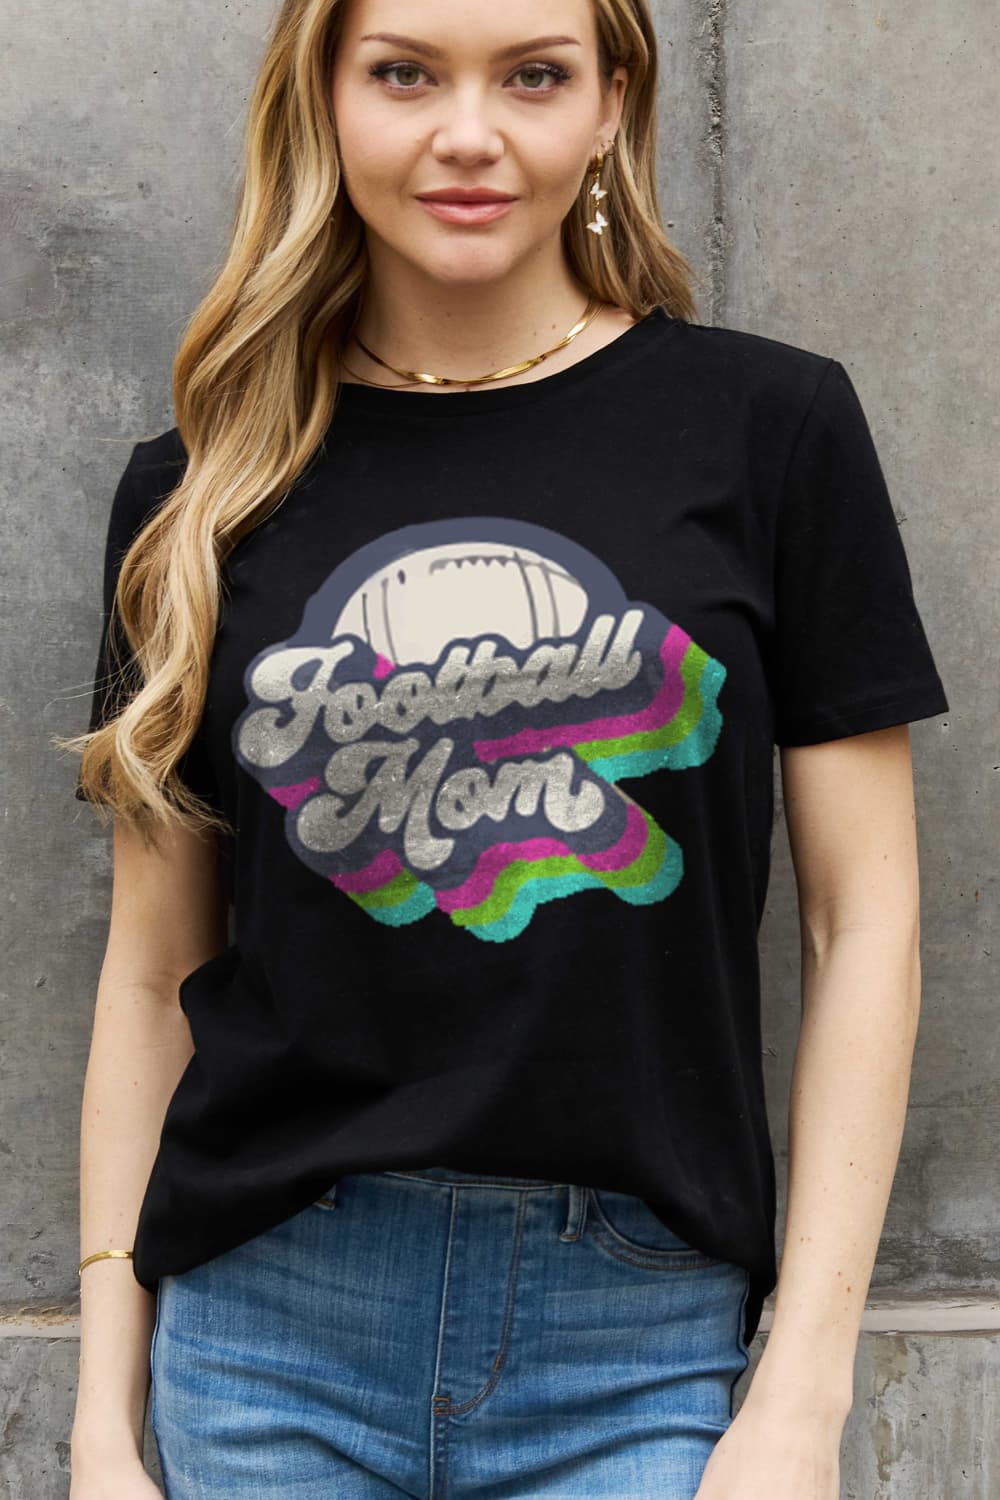 Simply Love Full Size FOOTBALL MOM Graphic Cotton Tee - Scarlett's Riverside Boutique 